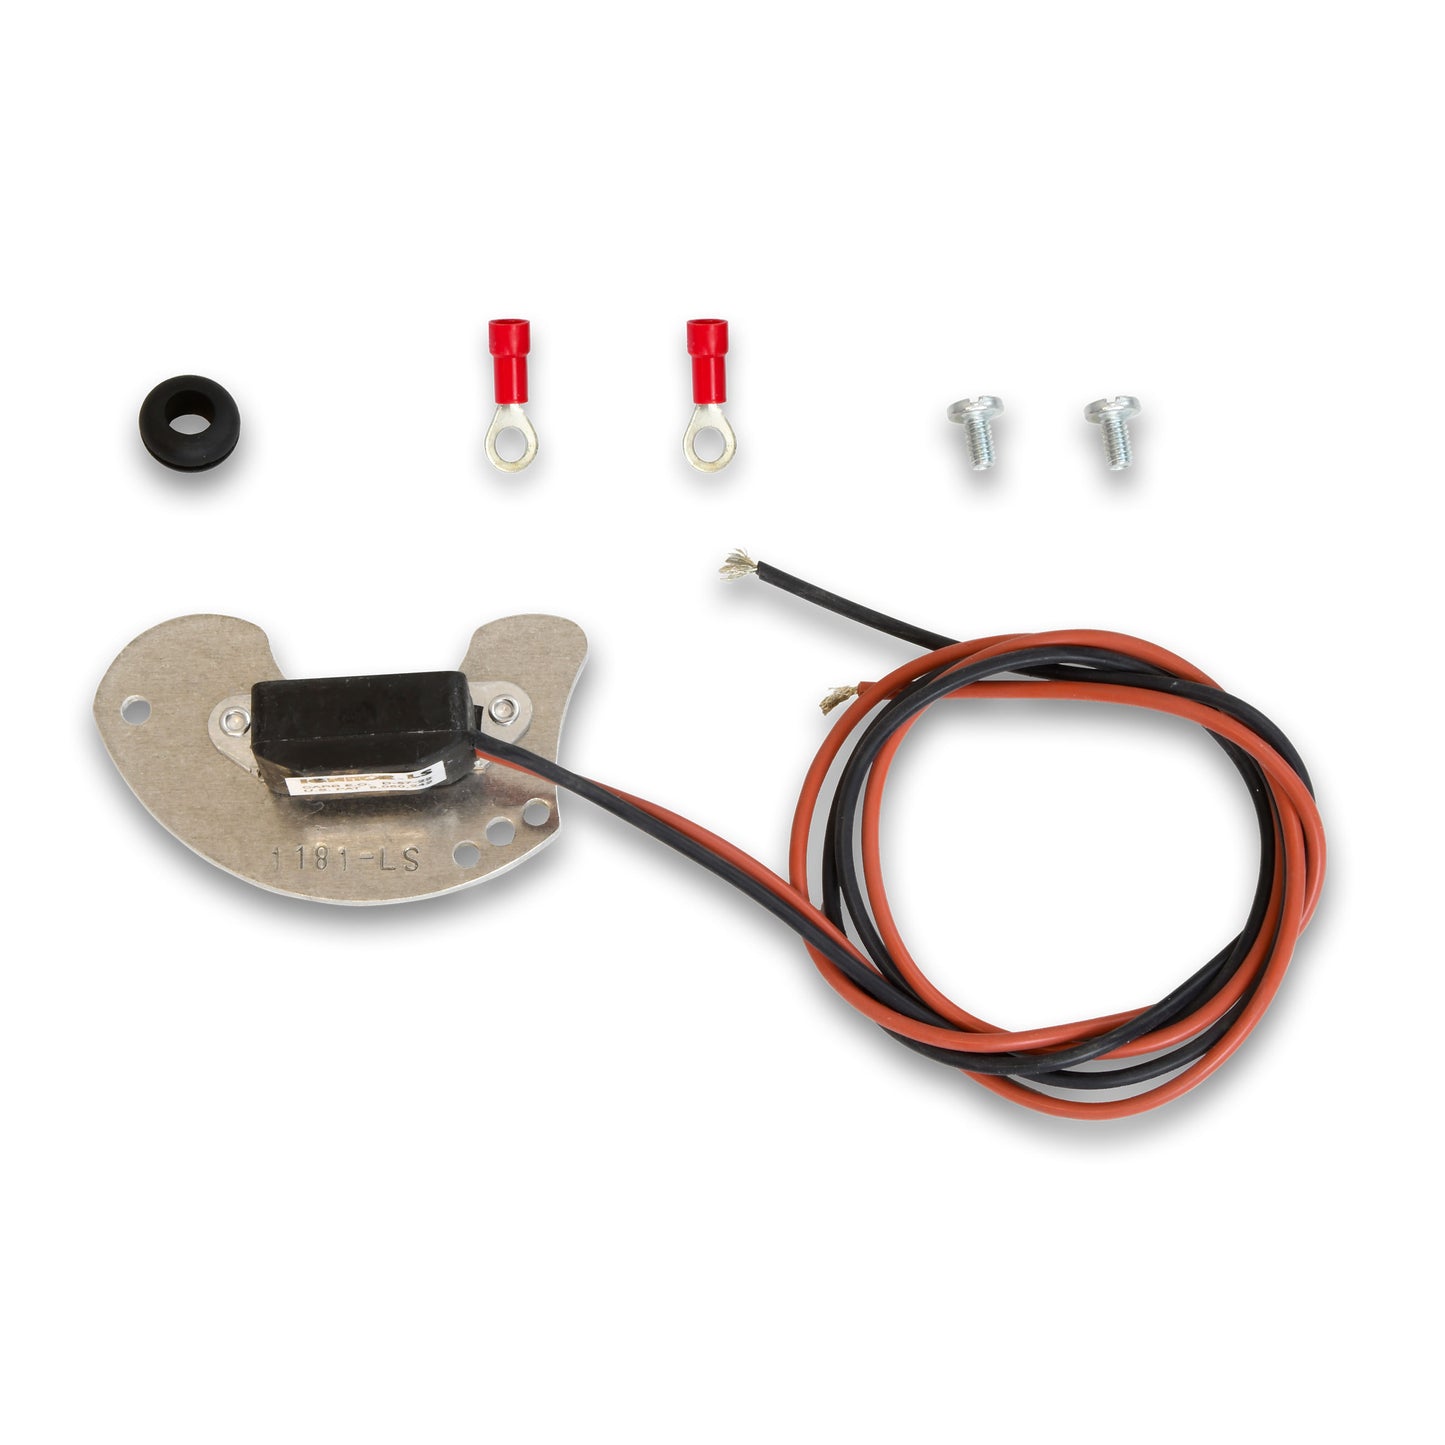 PerTronix Ignitor Electronic Ignition Conversion Kit-1181LS
